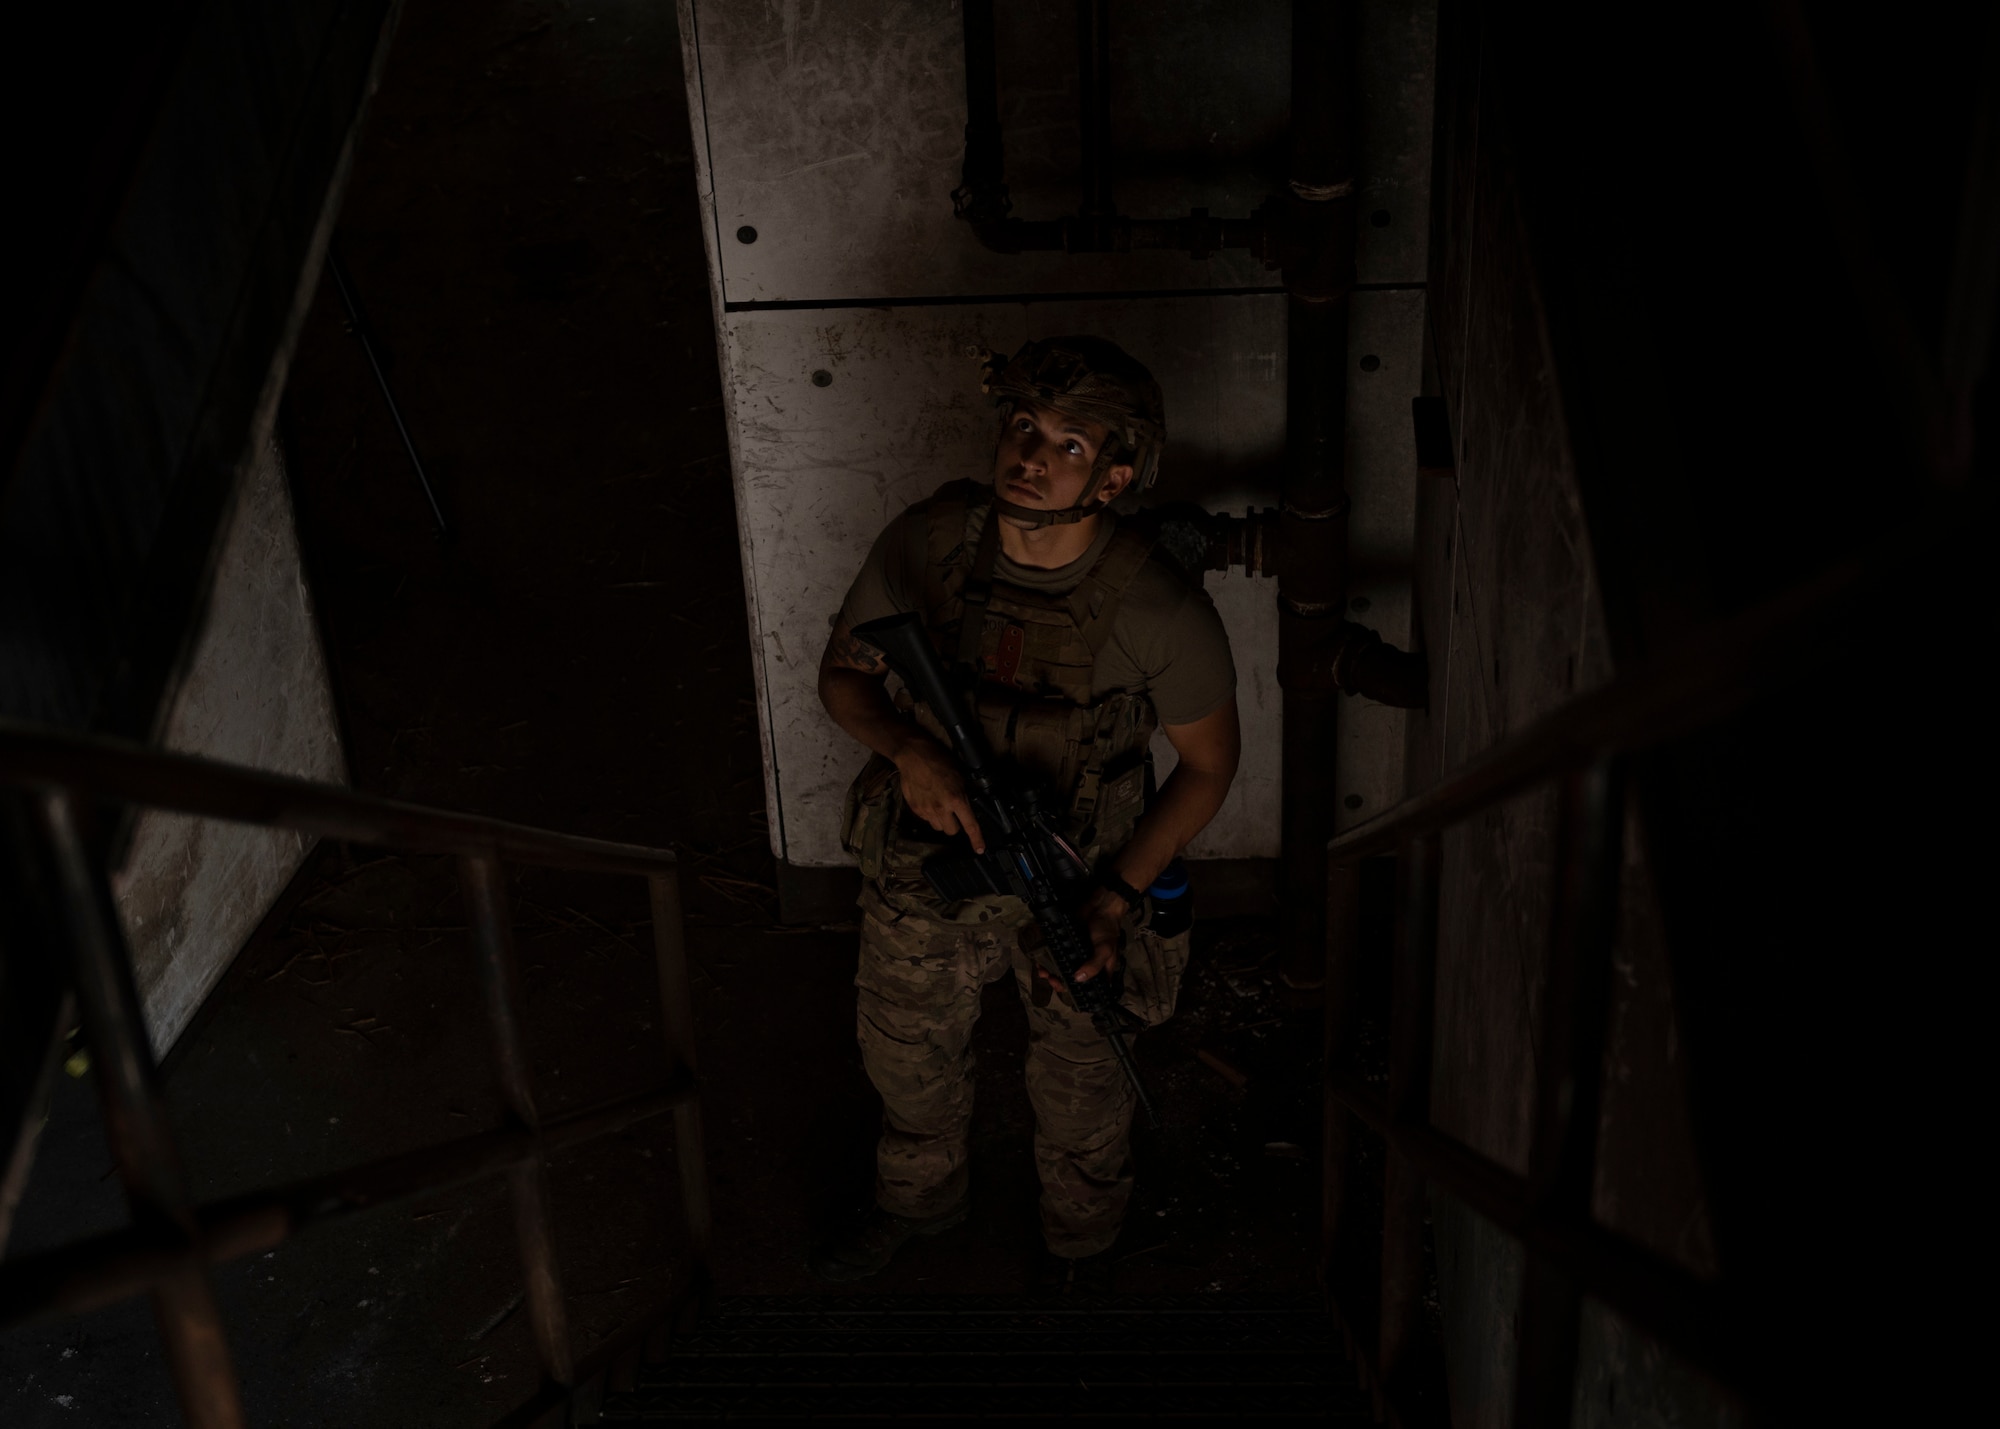 Airman 1st Class Jacobo Vasquez Cuartas, 20th Civil Engineer Squadron explosive ordnance disposal technician, looks upstairs before proceeding during field training exercise Operation Guillotine at Seymour Johnson Air Force Base, North Carolina, July 27, 2021.